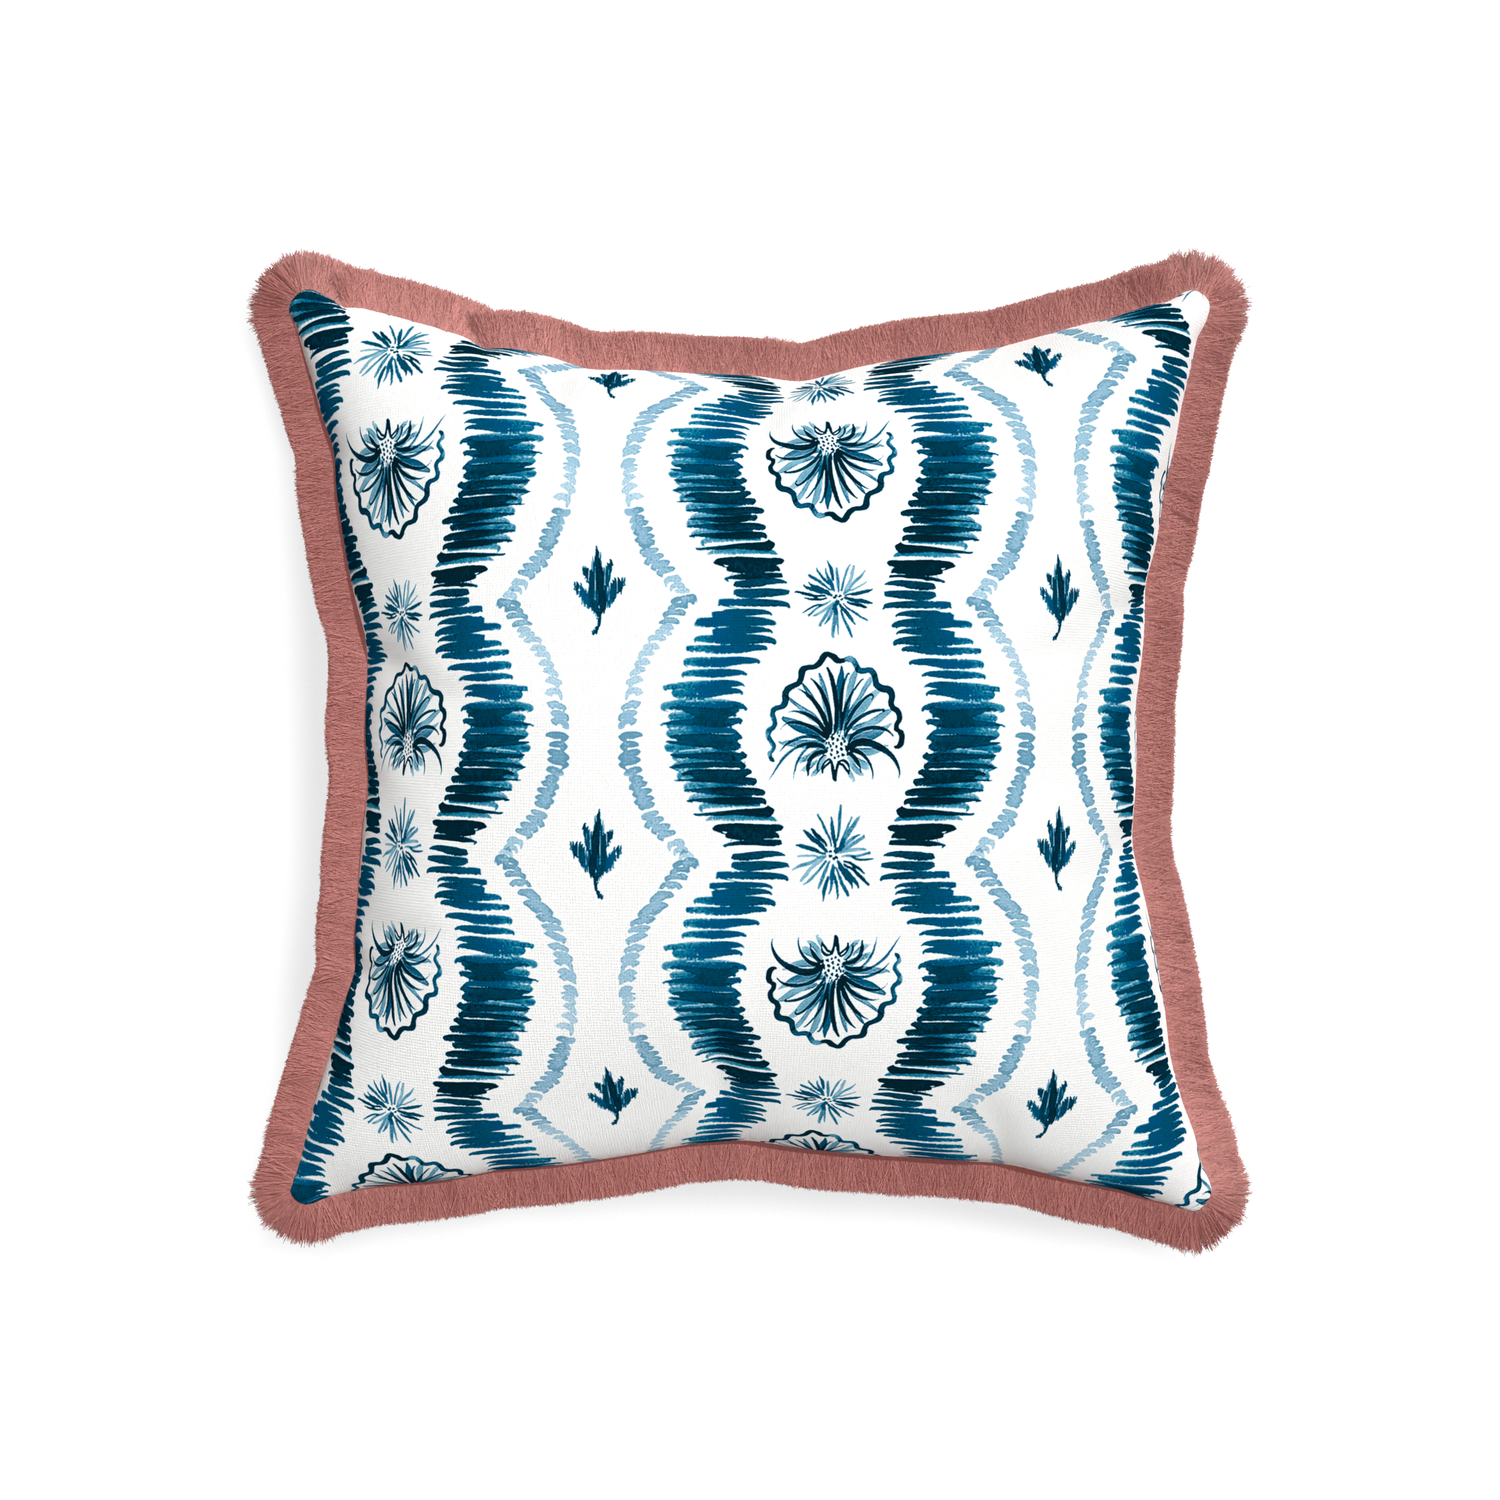 20-square alice custom blue ikatpillow with d fringe on white background